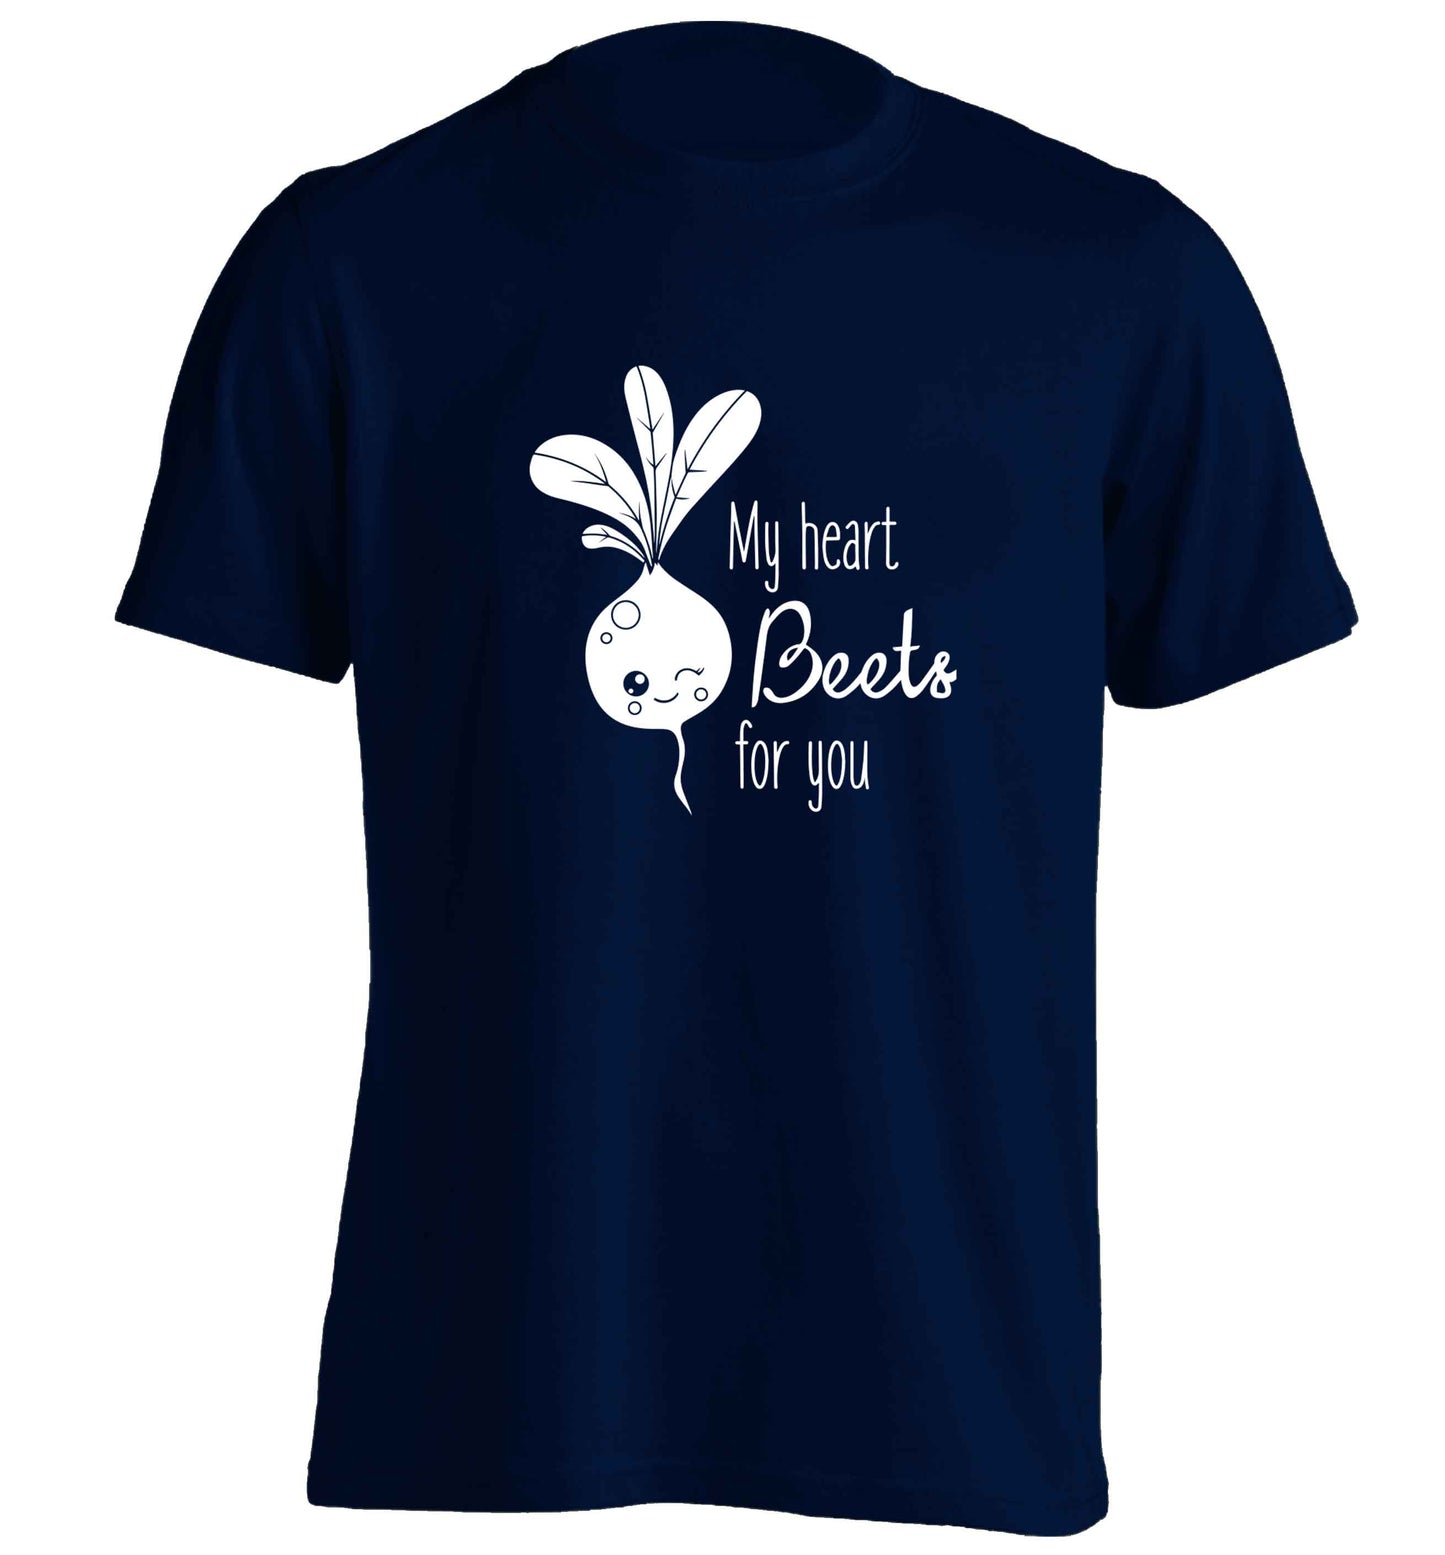 My heart beets for you adults unisex navy Tshirt 2XL